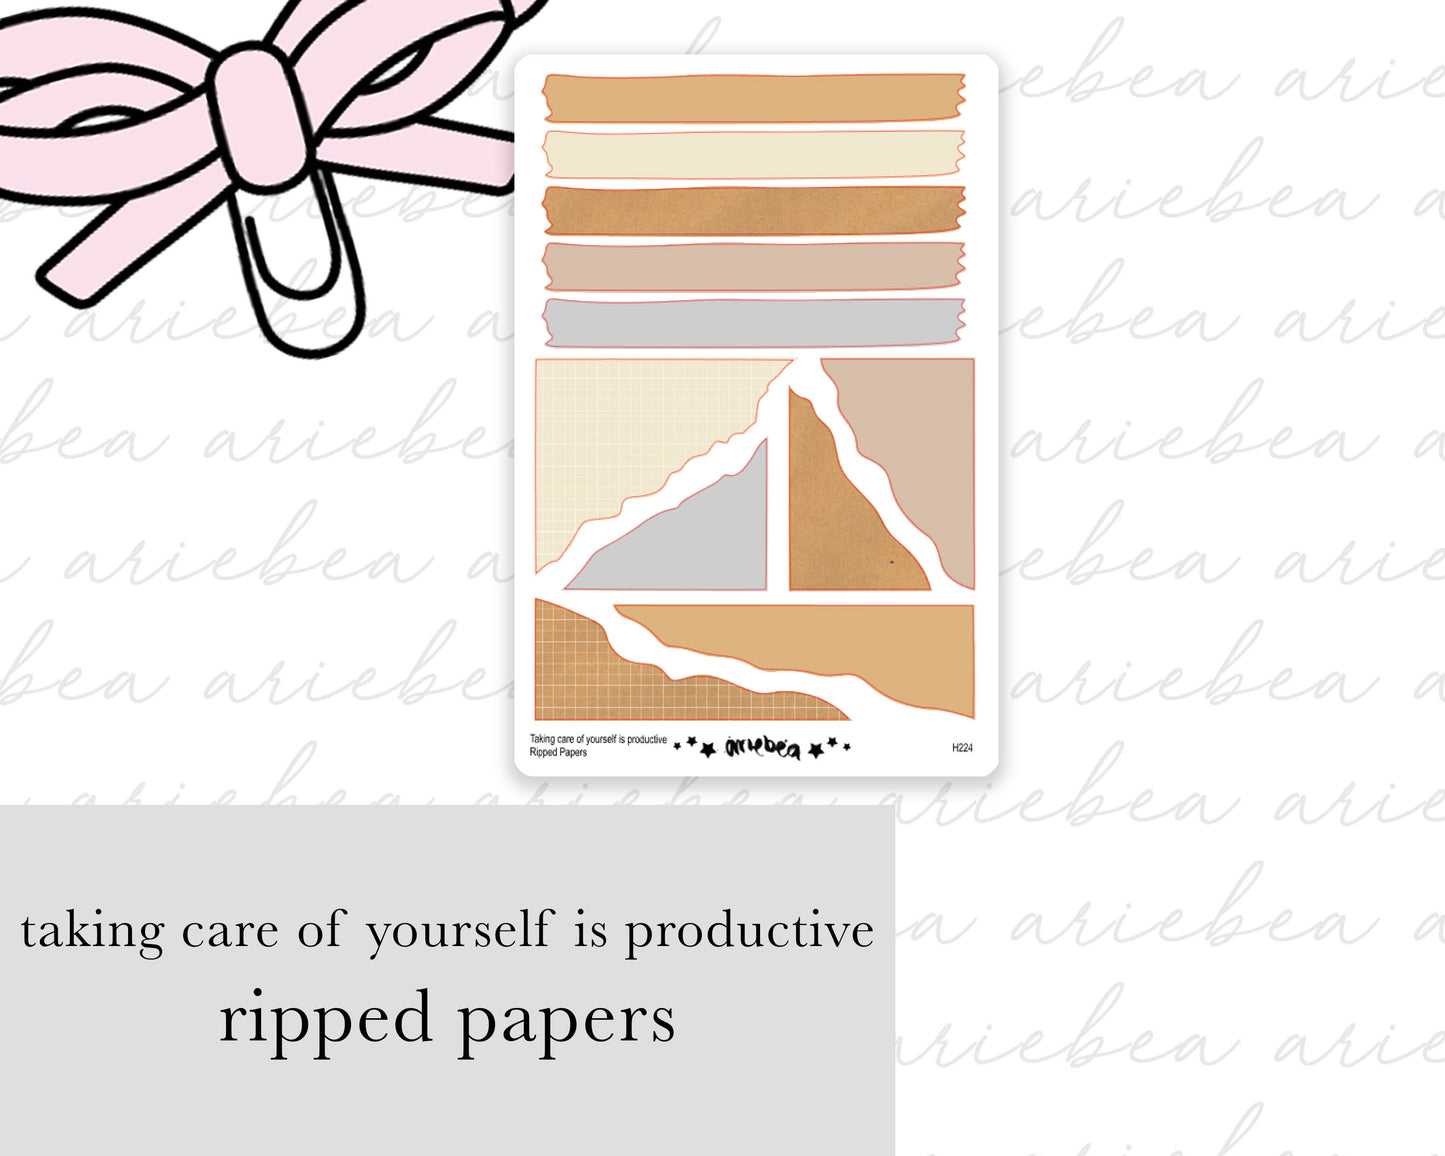 Taking Care of Yourself is Productive Full Mini Kit (4 pages)